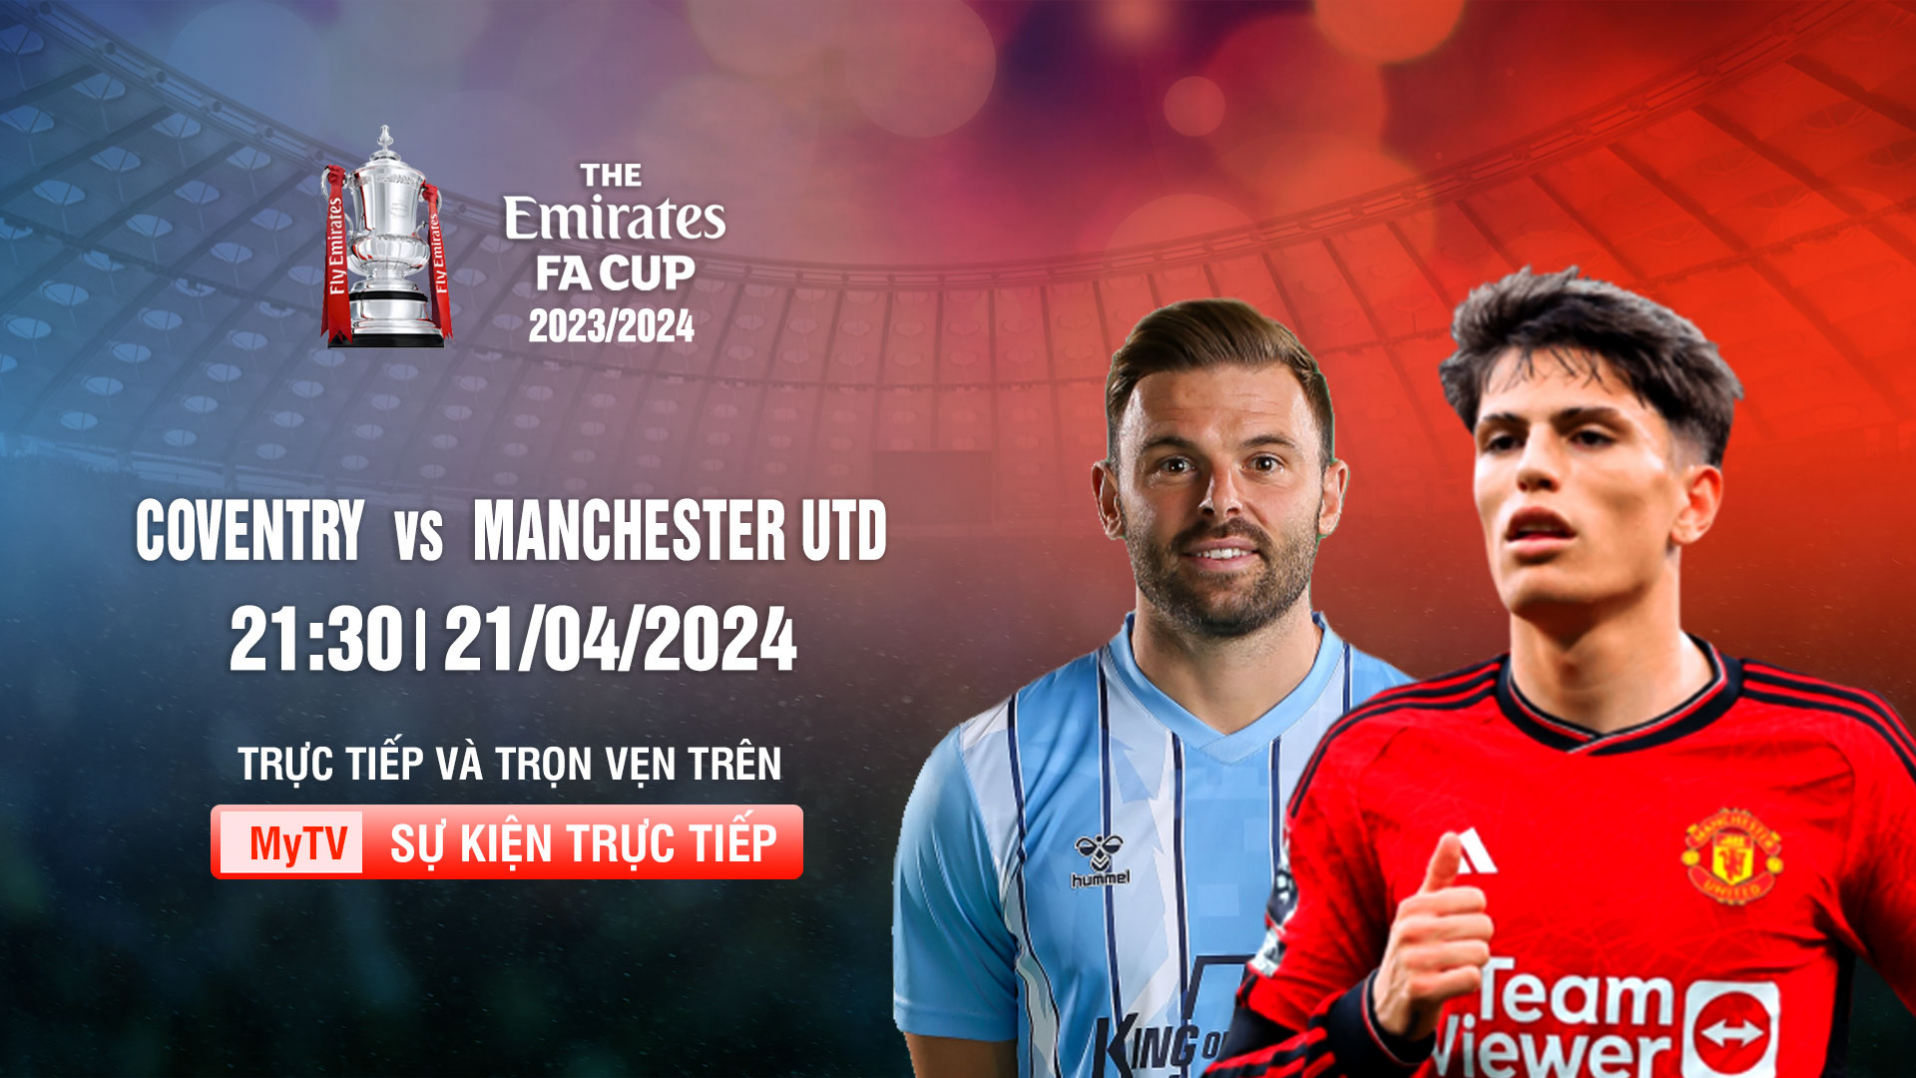 Coventry vs Manchester UTD - Bán kết FA Cup 2023/2024